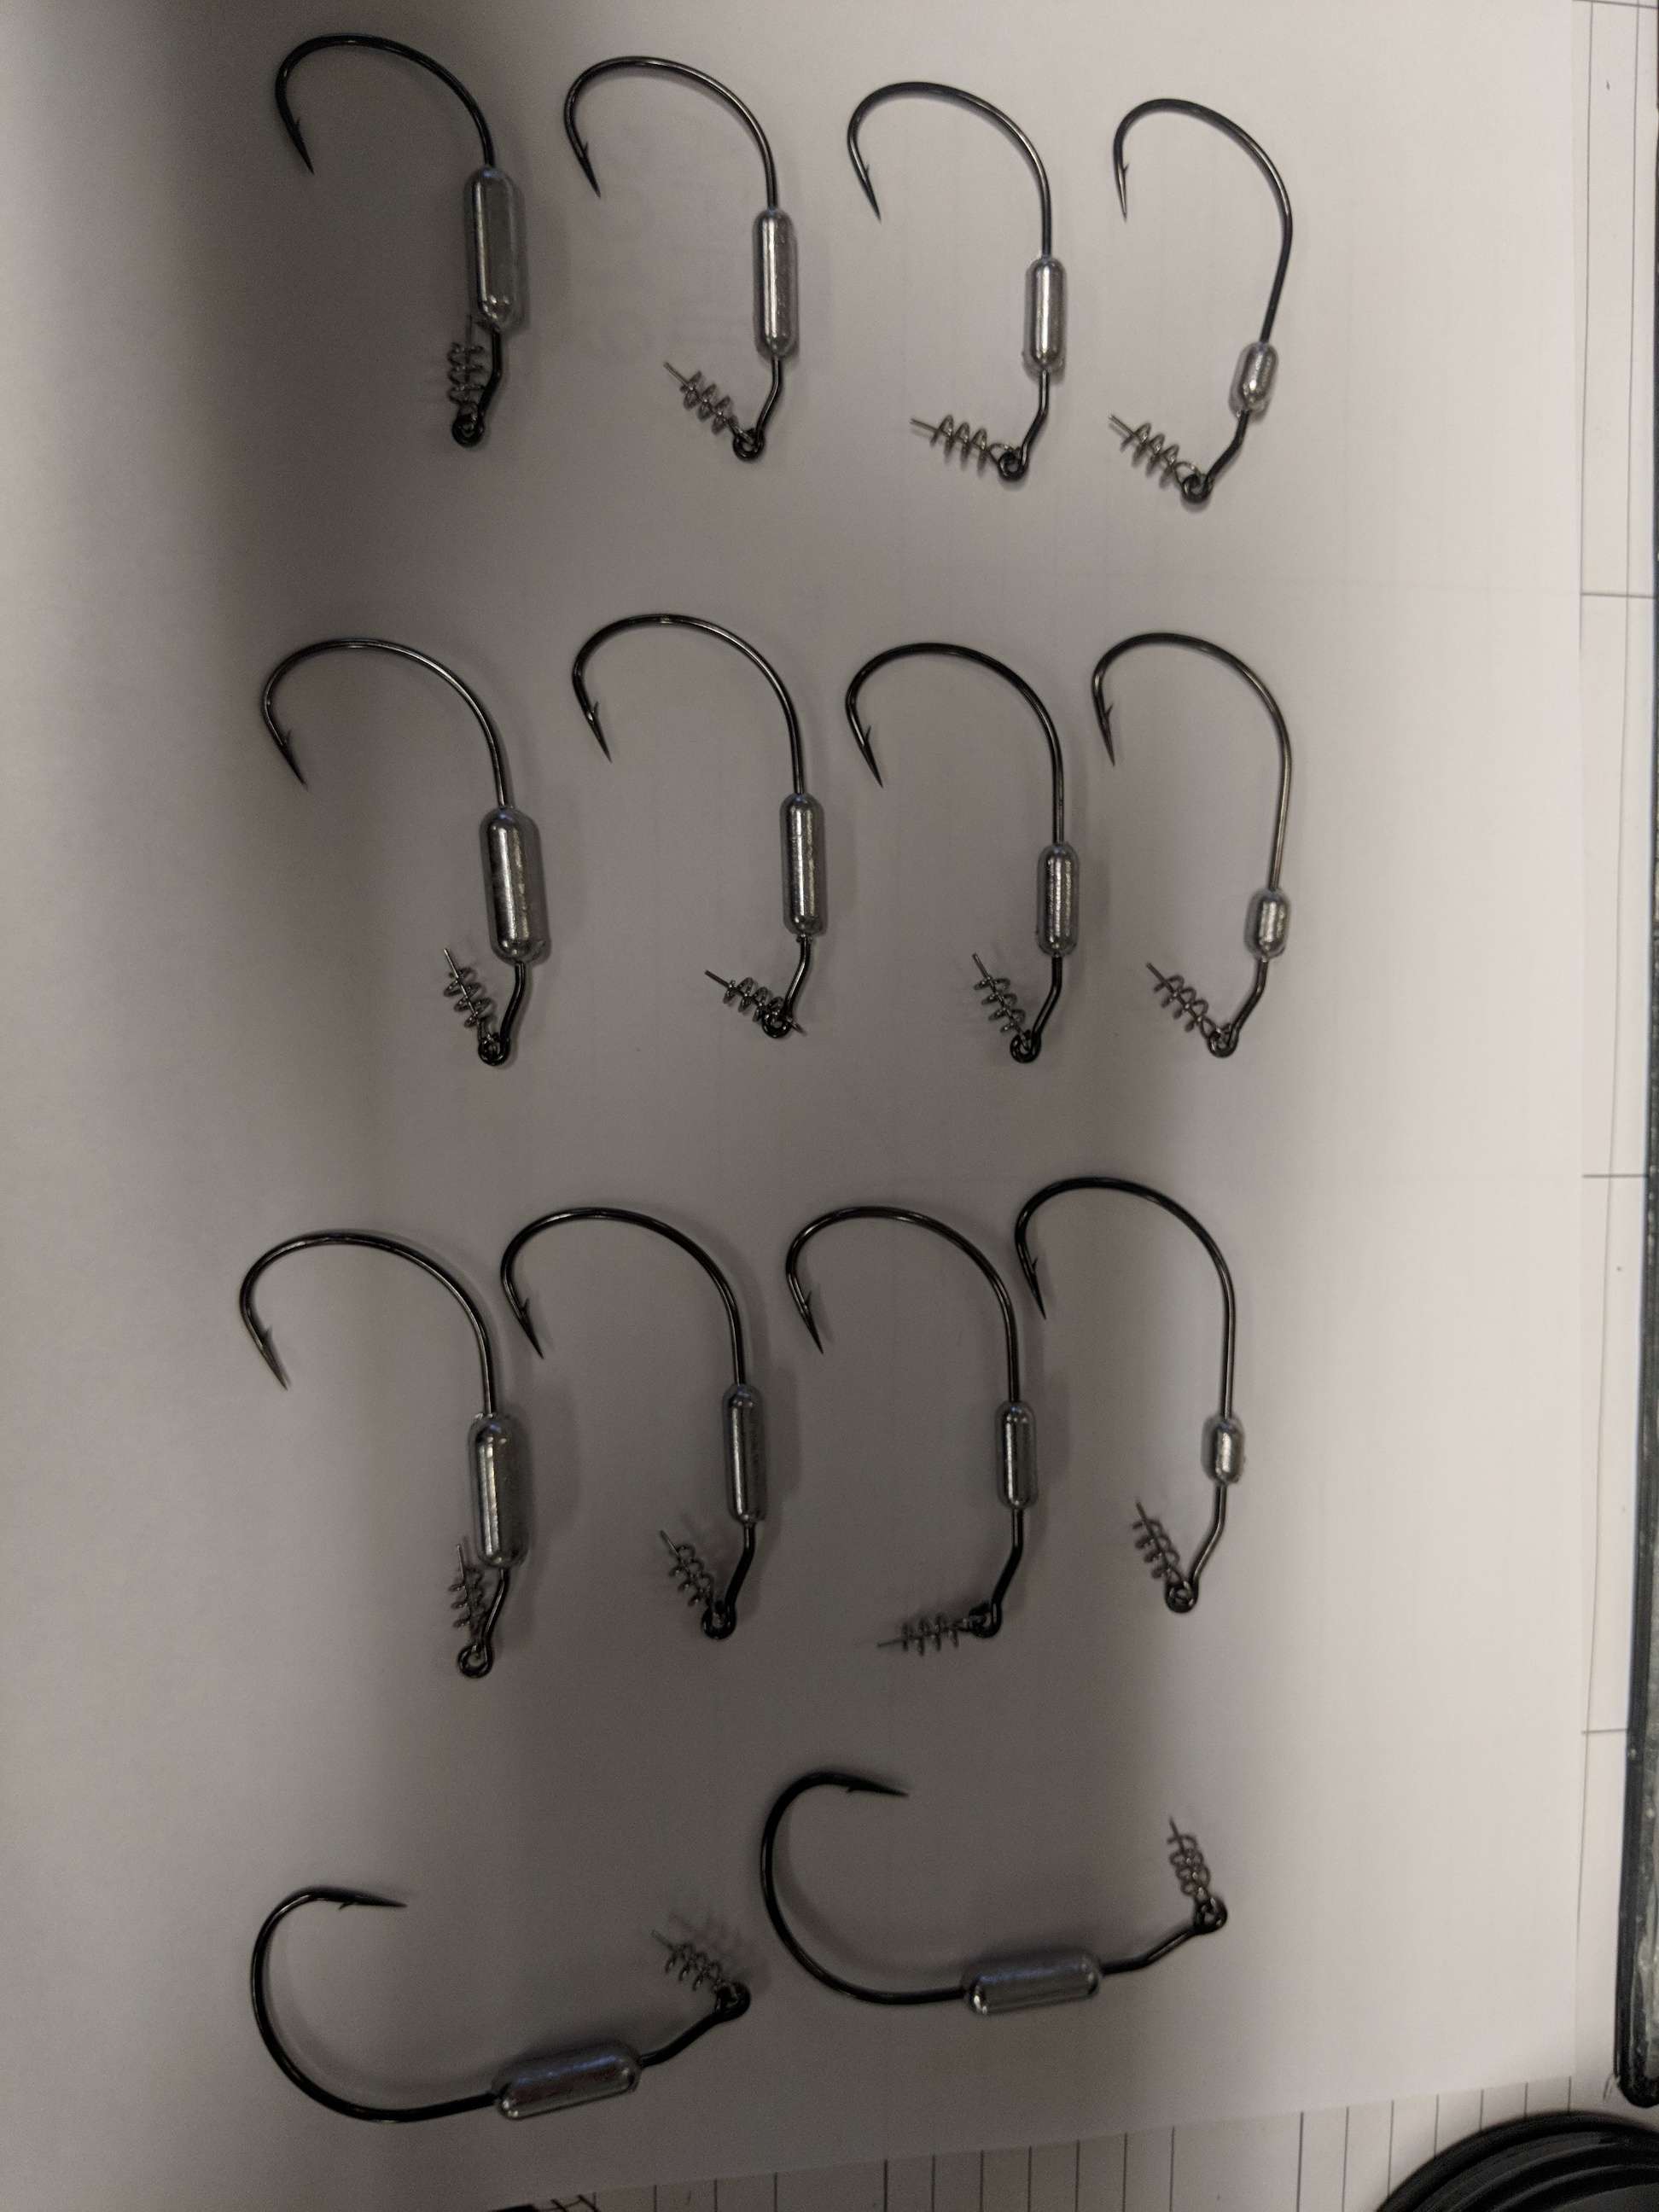 Weighted swimbait hook mold - Tacklemaking - Bass Fishing Forums